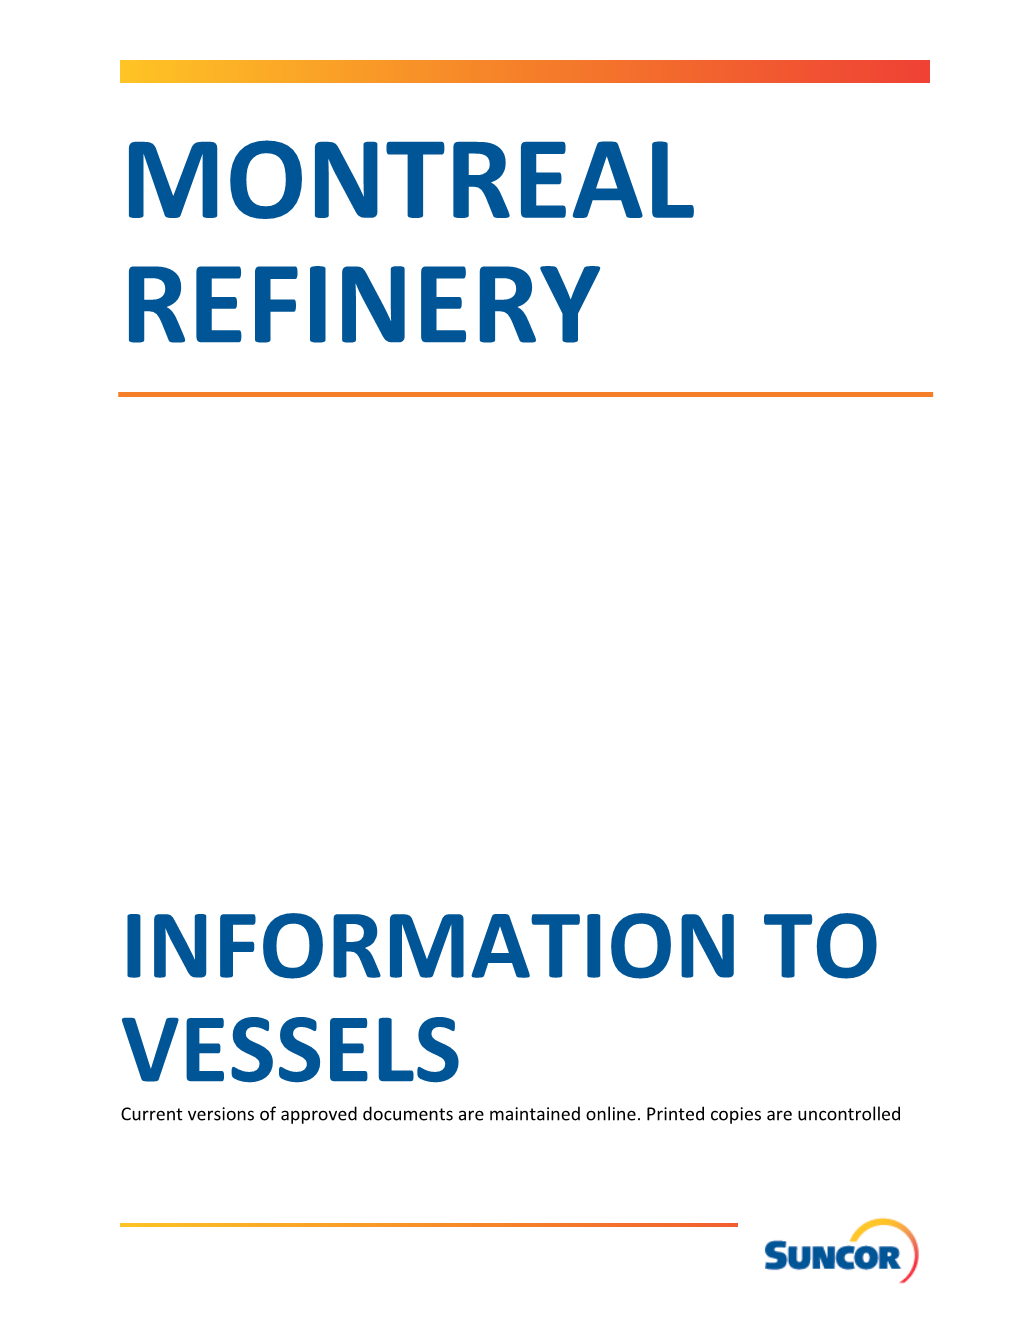 Montreal Marine Terminal Information to Vessels